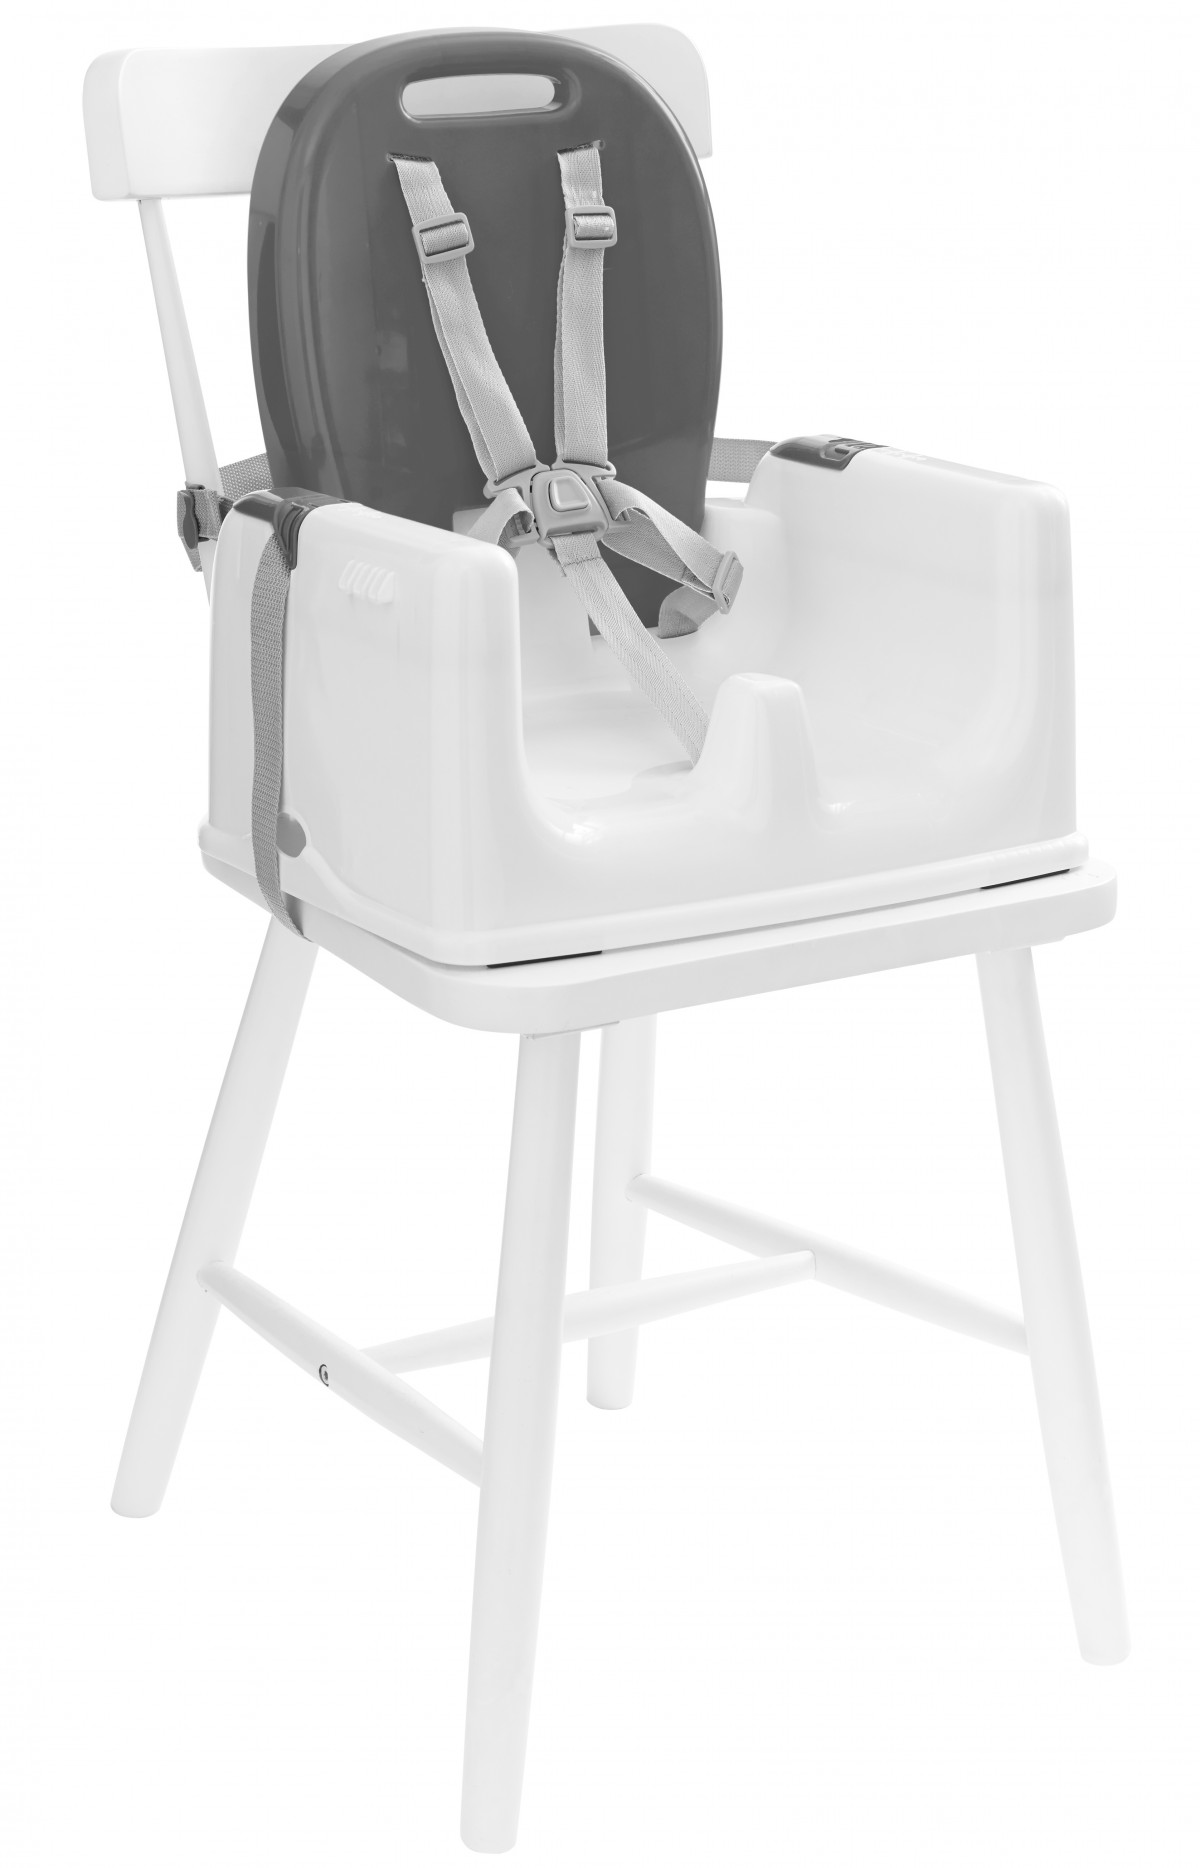 Portable Booster Highchairs